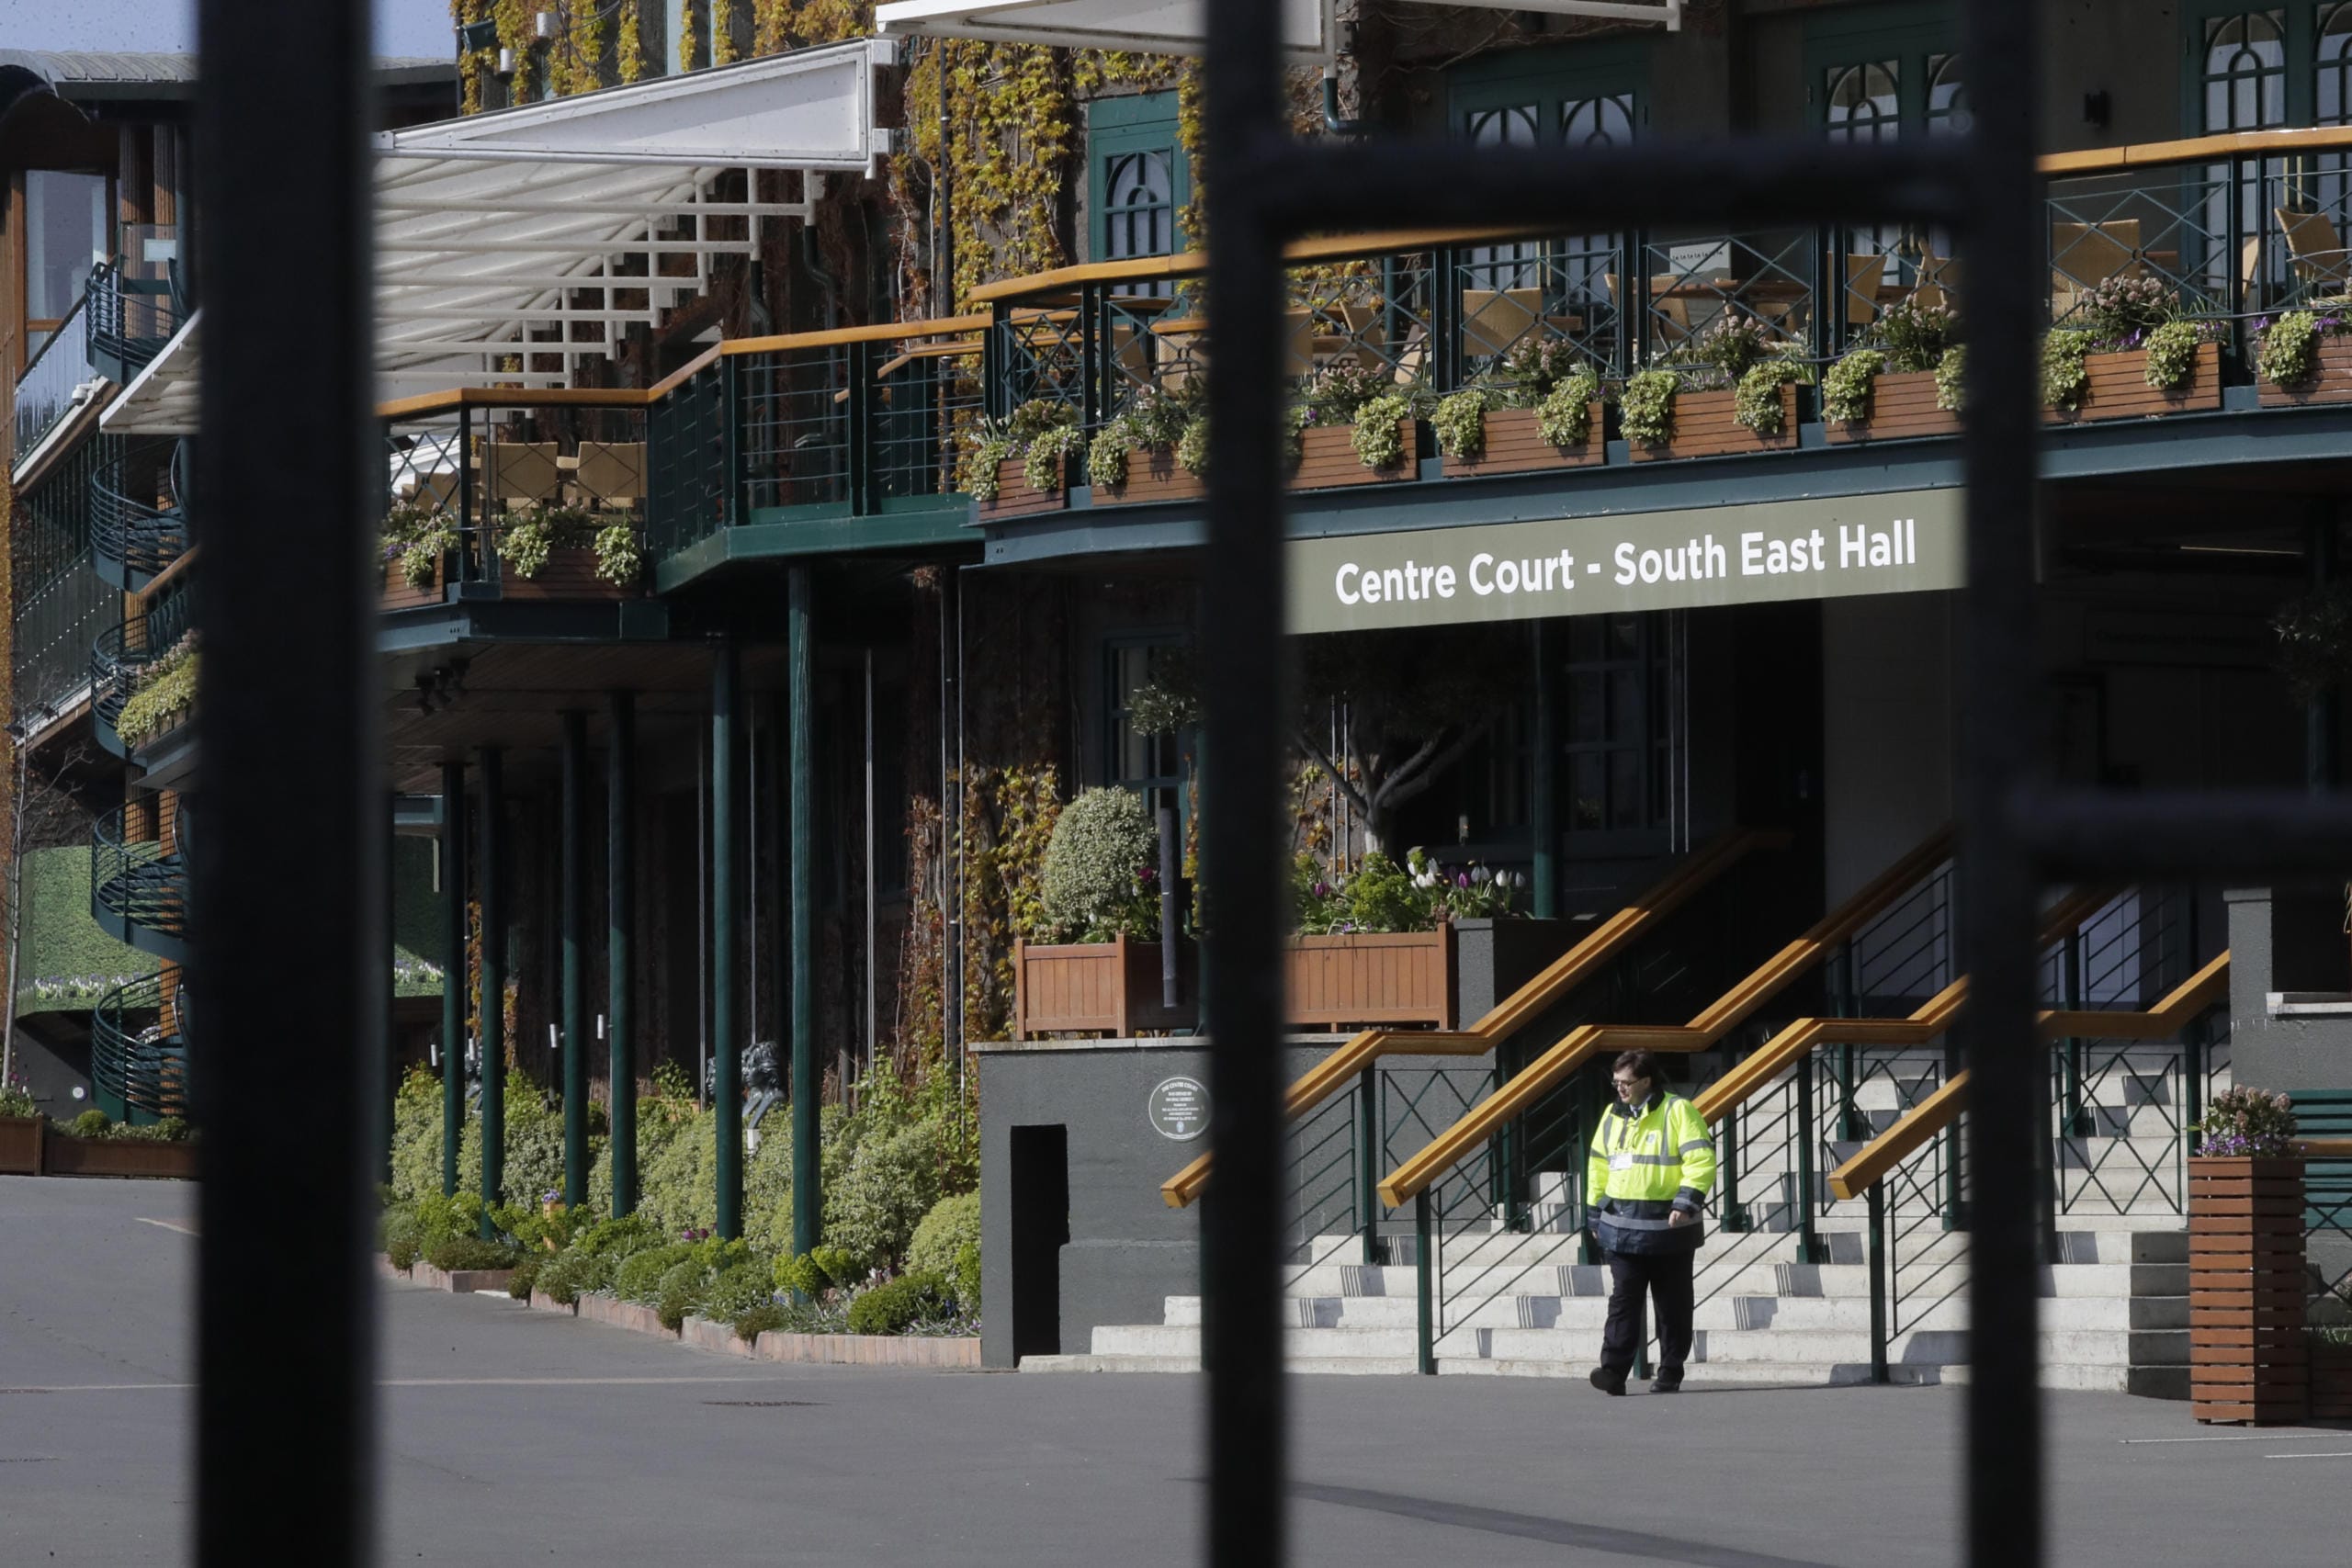 A security guard inside the main gates to Wimbledon as it is announced the the Wimbledon tennis Championships for 2020 has been cancelled due to the coronavirus in London, Wednesday, April 1, 2020.